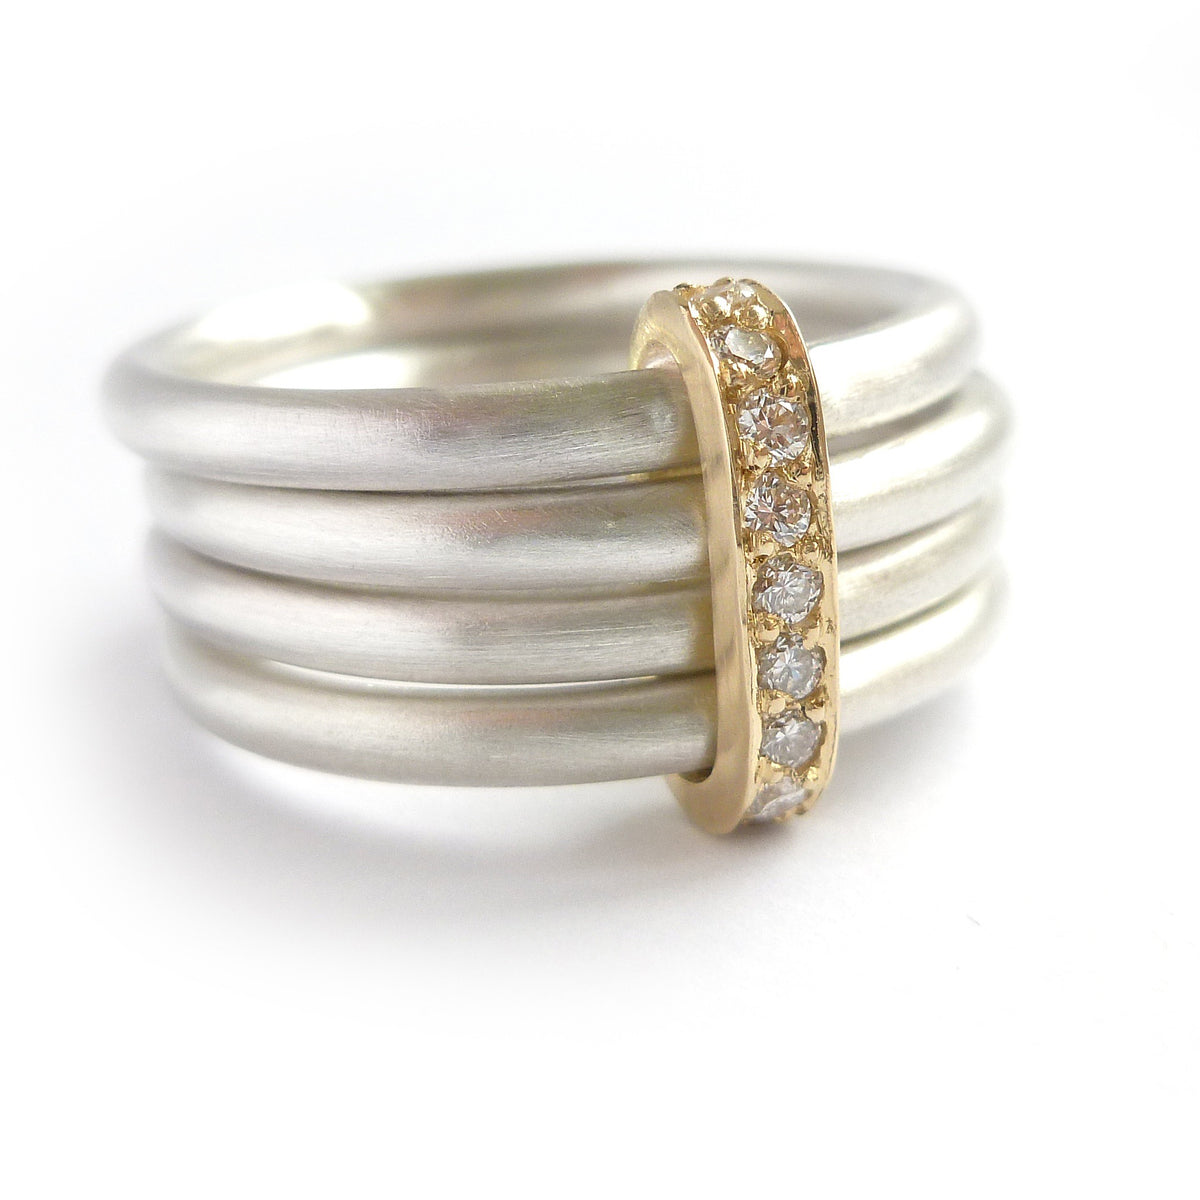 Four 4 band modern contemporary silver and gold two tone pave set diamond ring handmade by Sue Lane